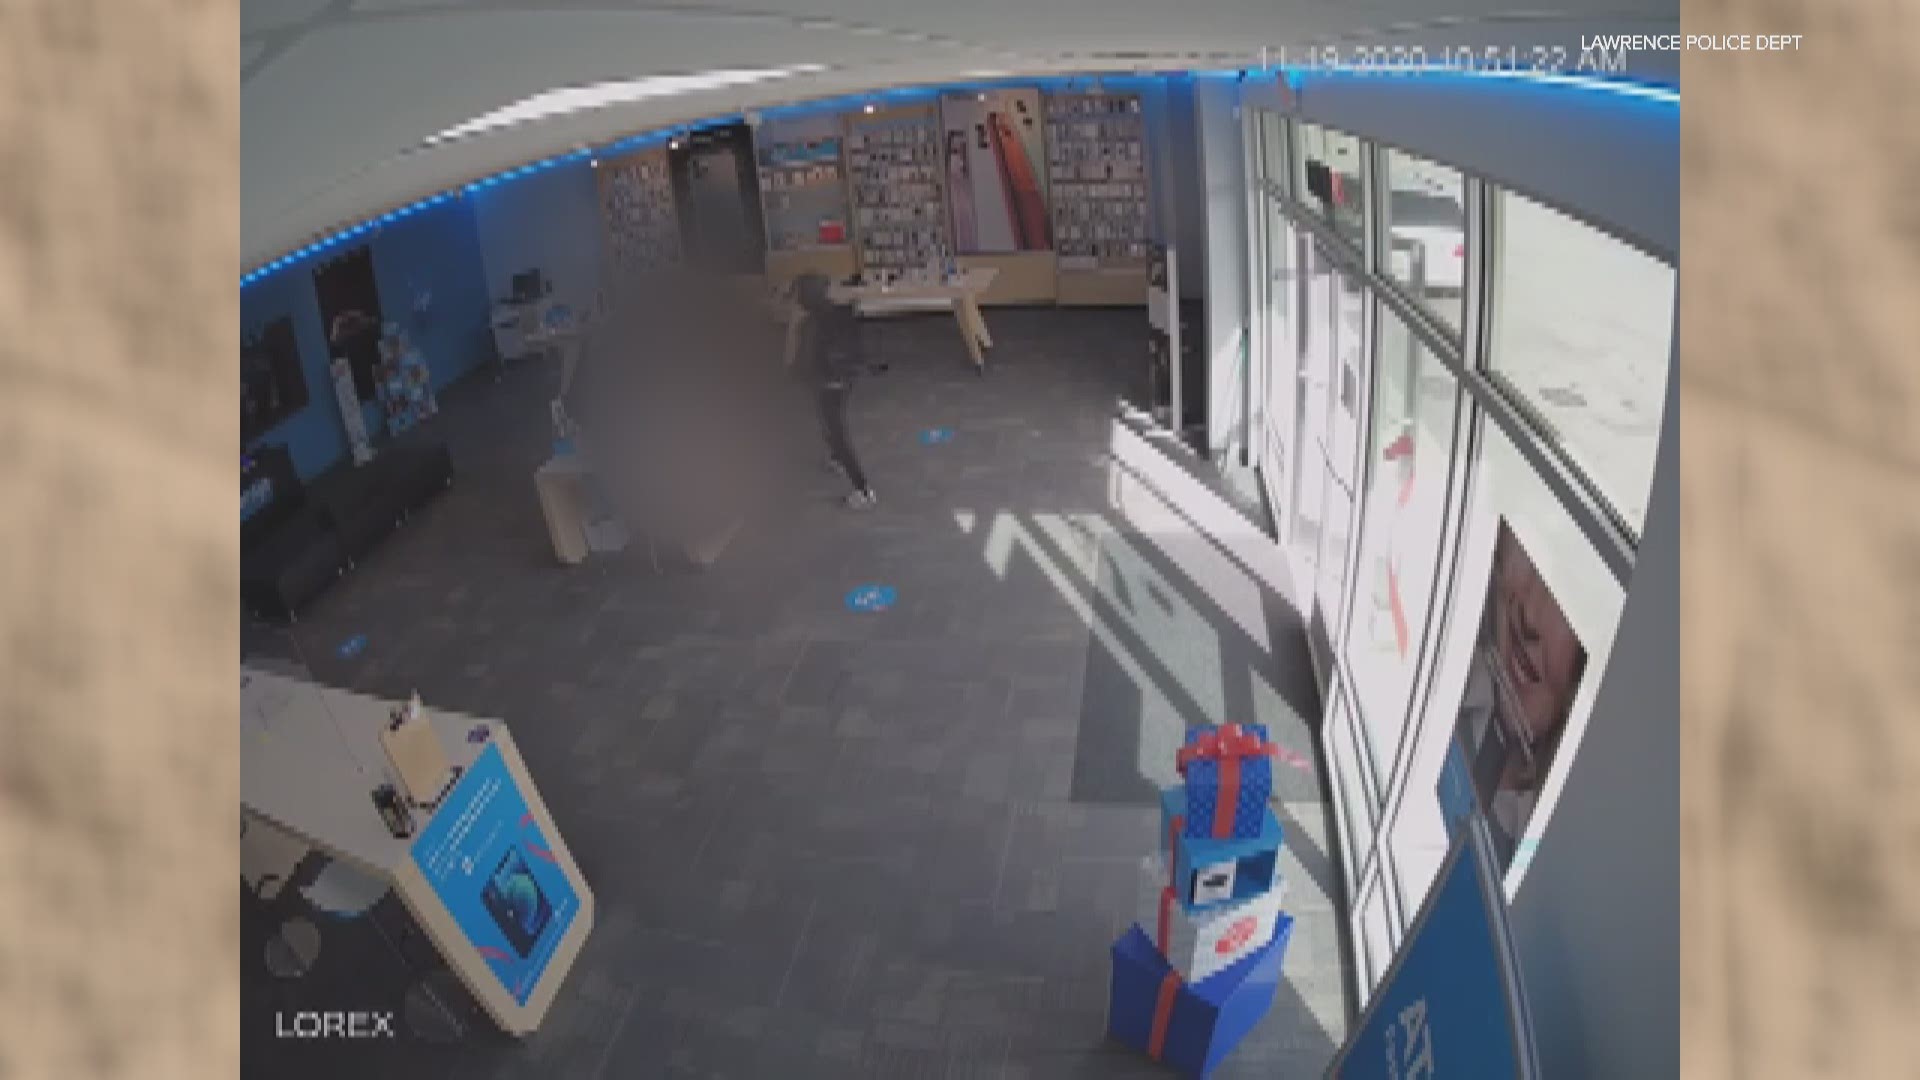 Lawrence Police hope surveillance video will help identify the suspect from a robbery at an AT&T store.